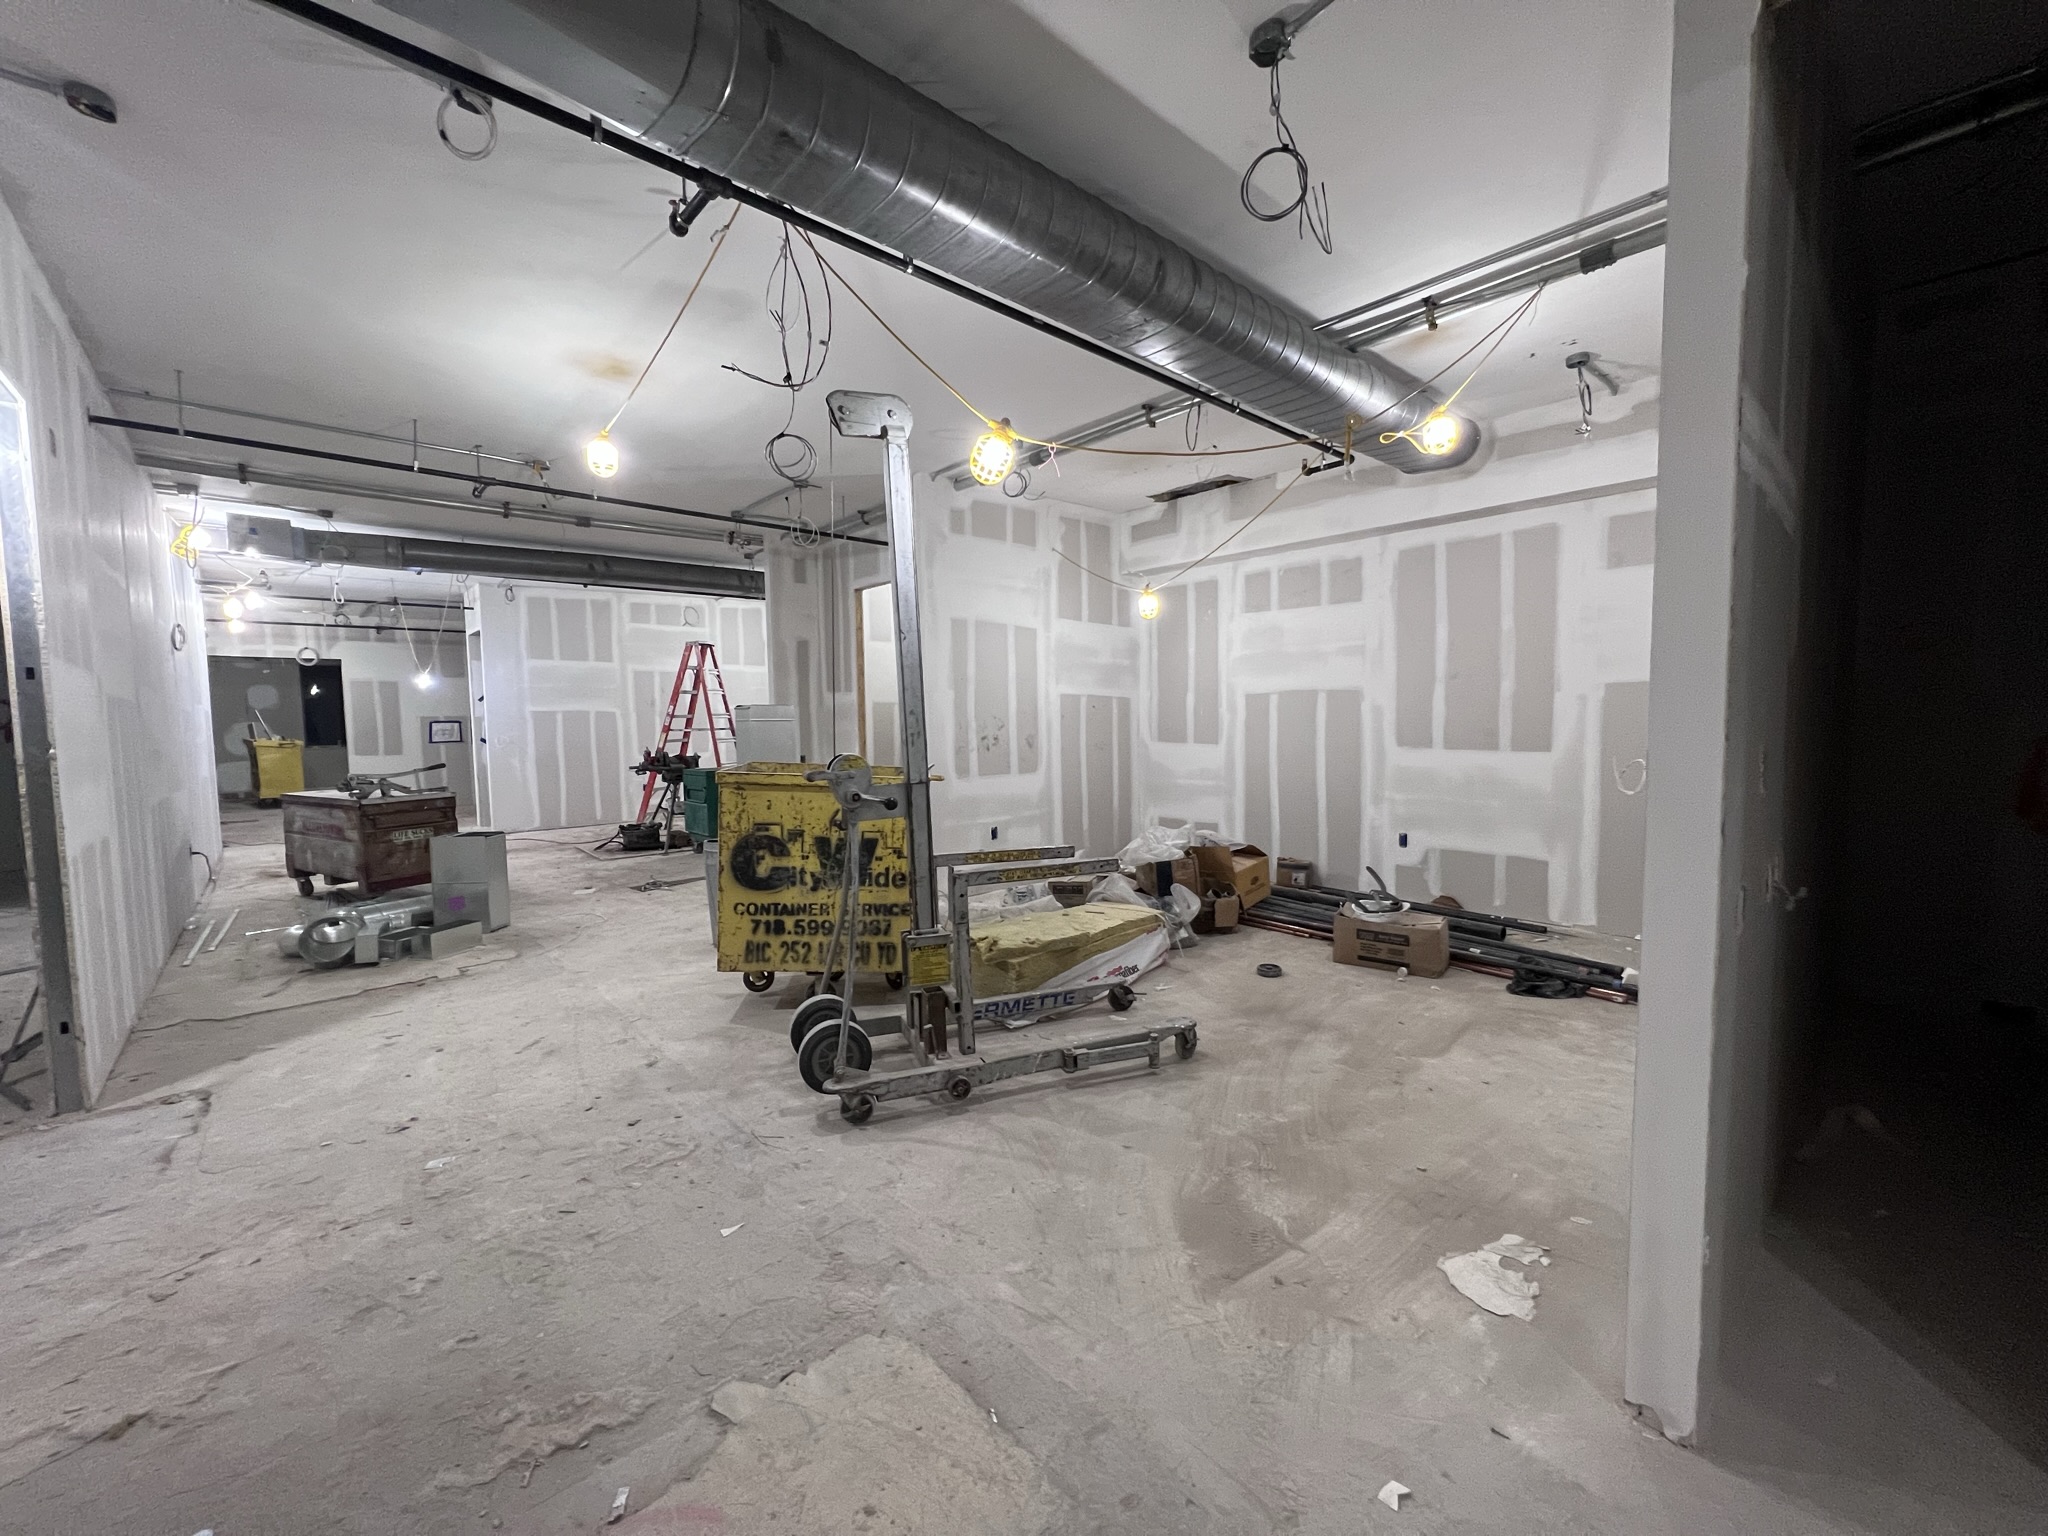 construction photos at 20 west 55th street - moving along